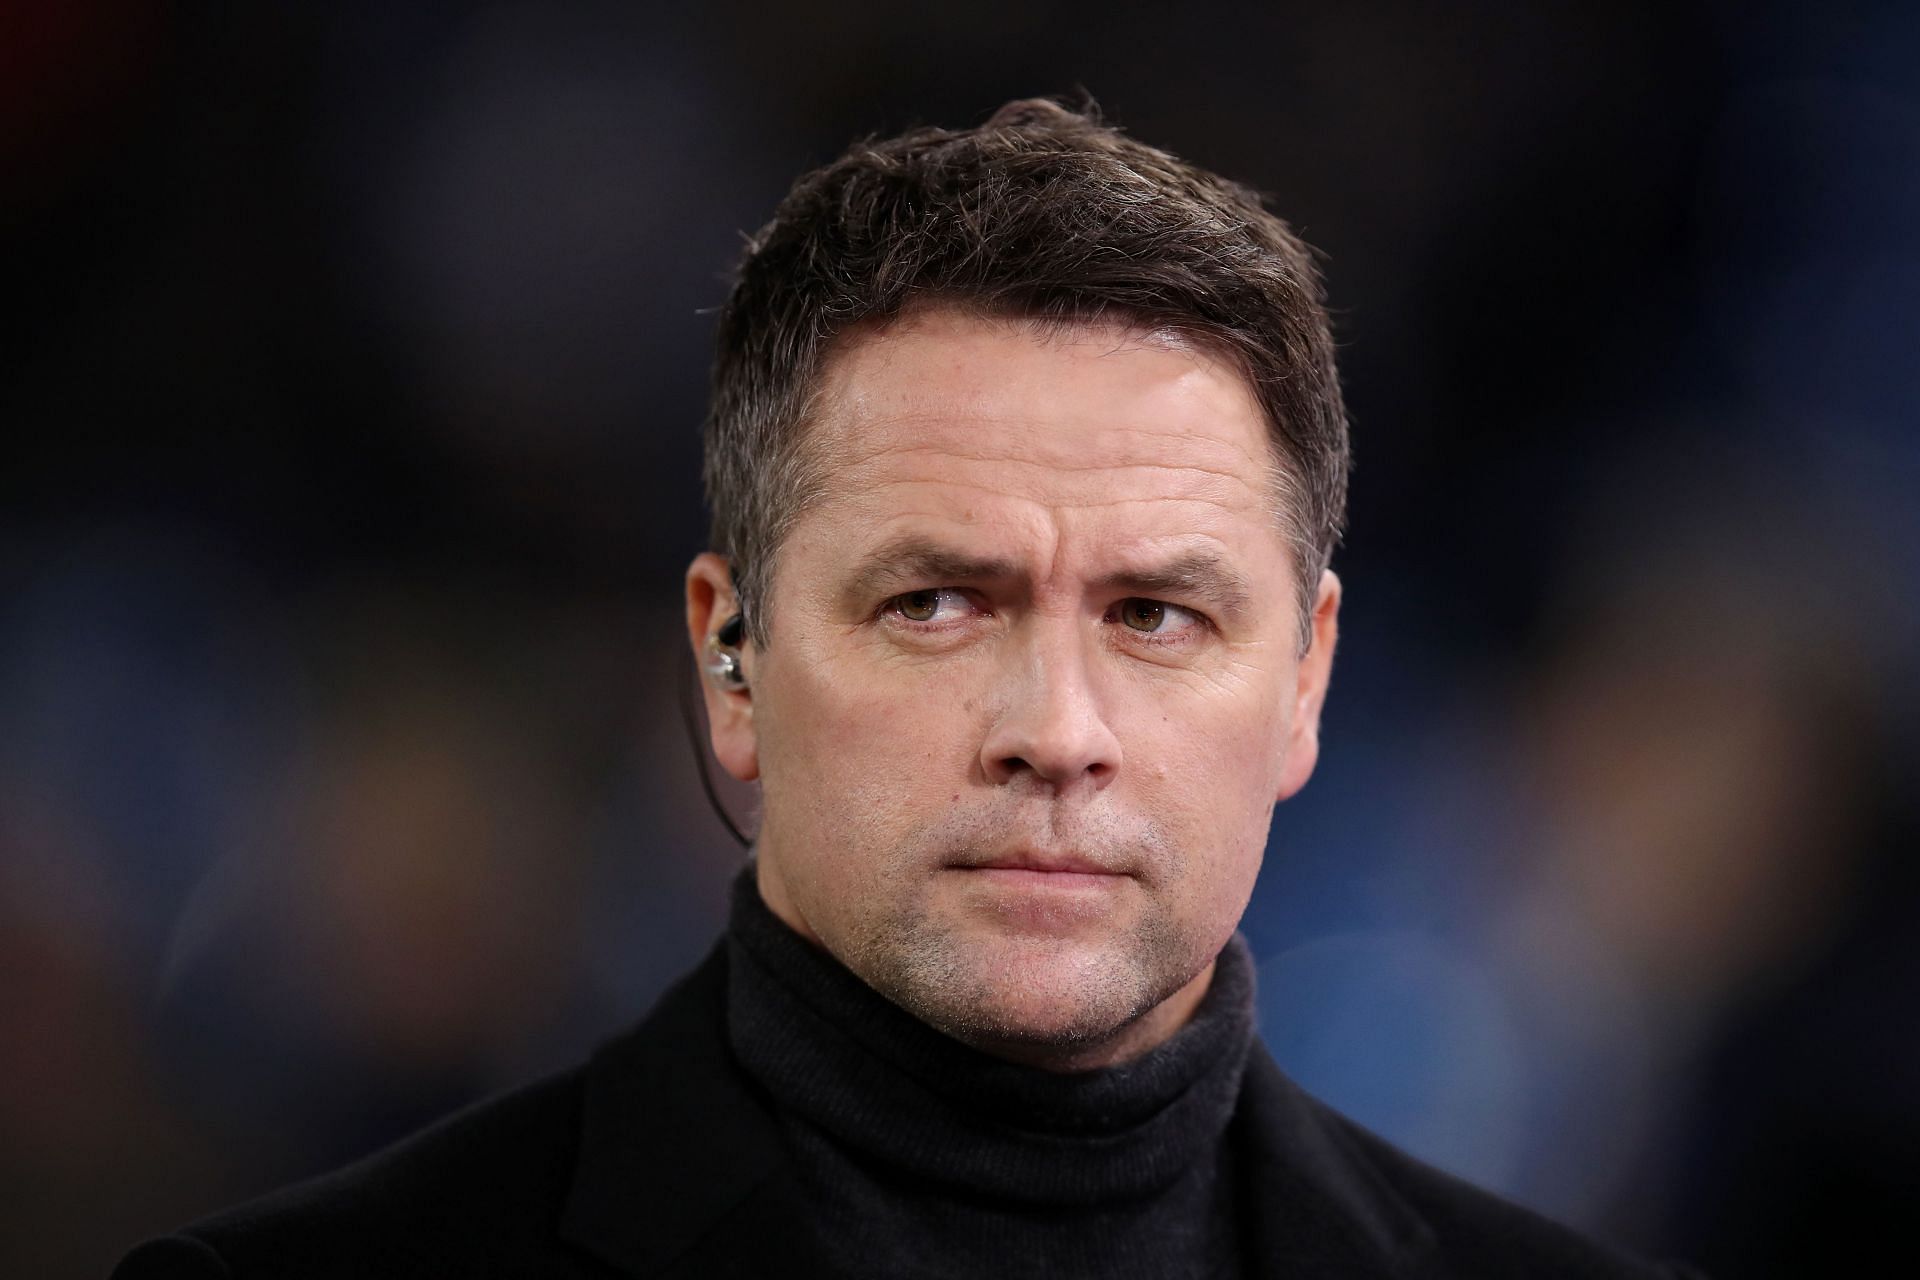 Michael Owen is being put through the ringer